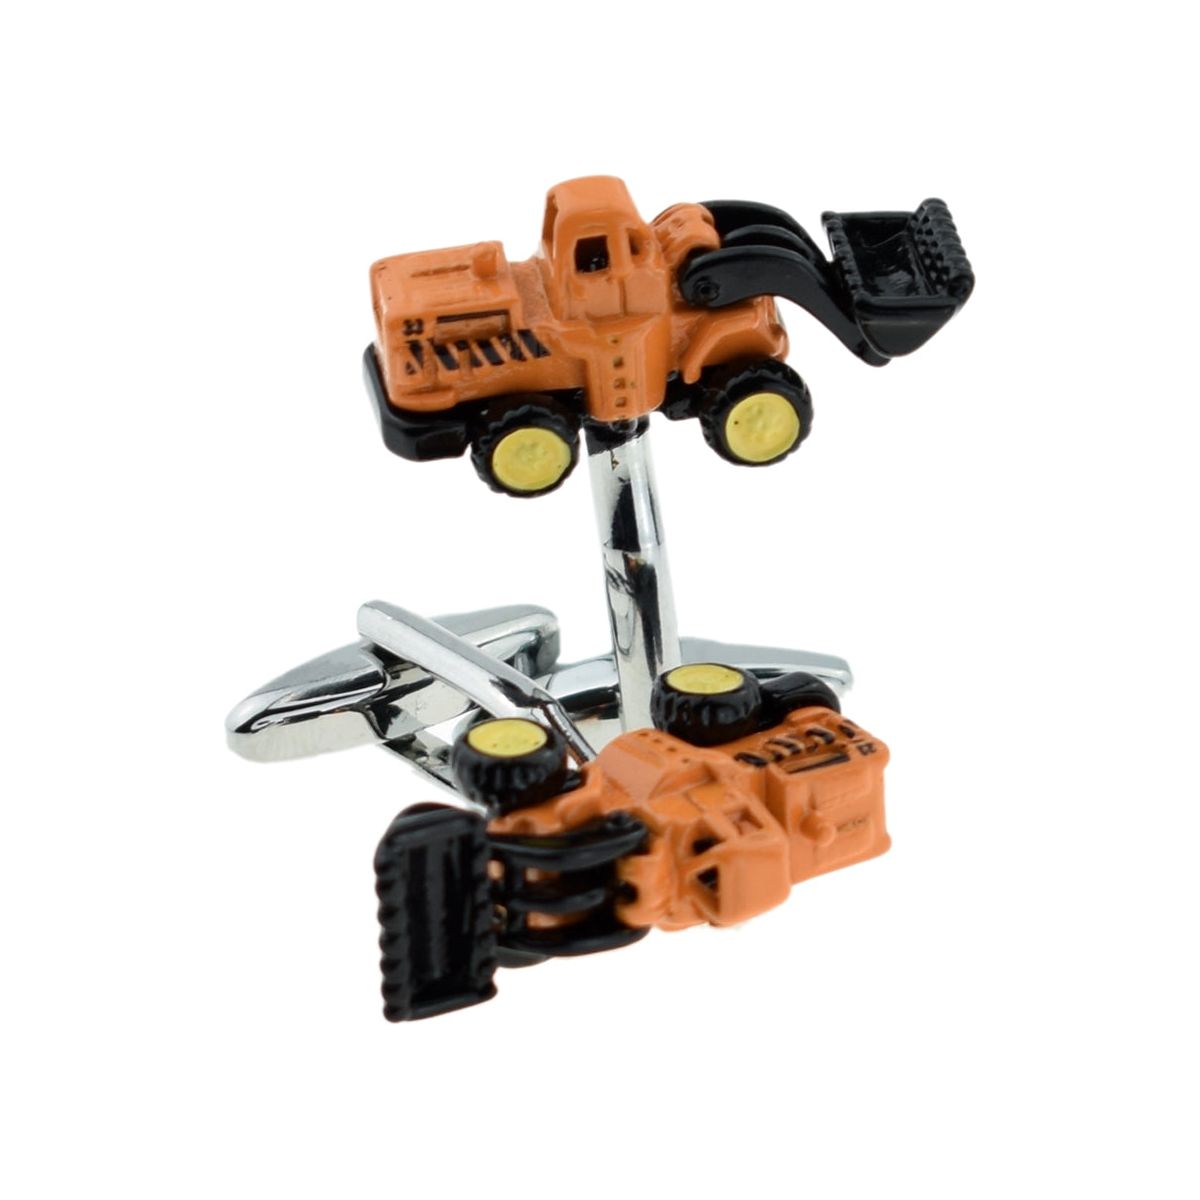 Tractor Excavator Loader Digger Cufflinks - Ashton and Finch